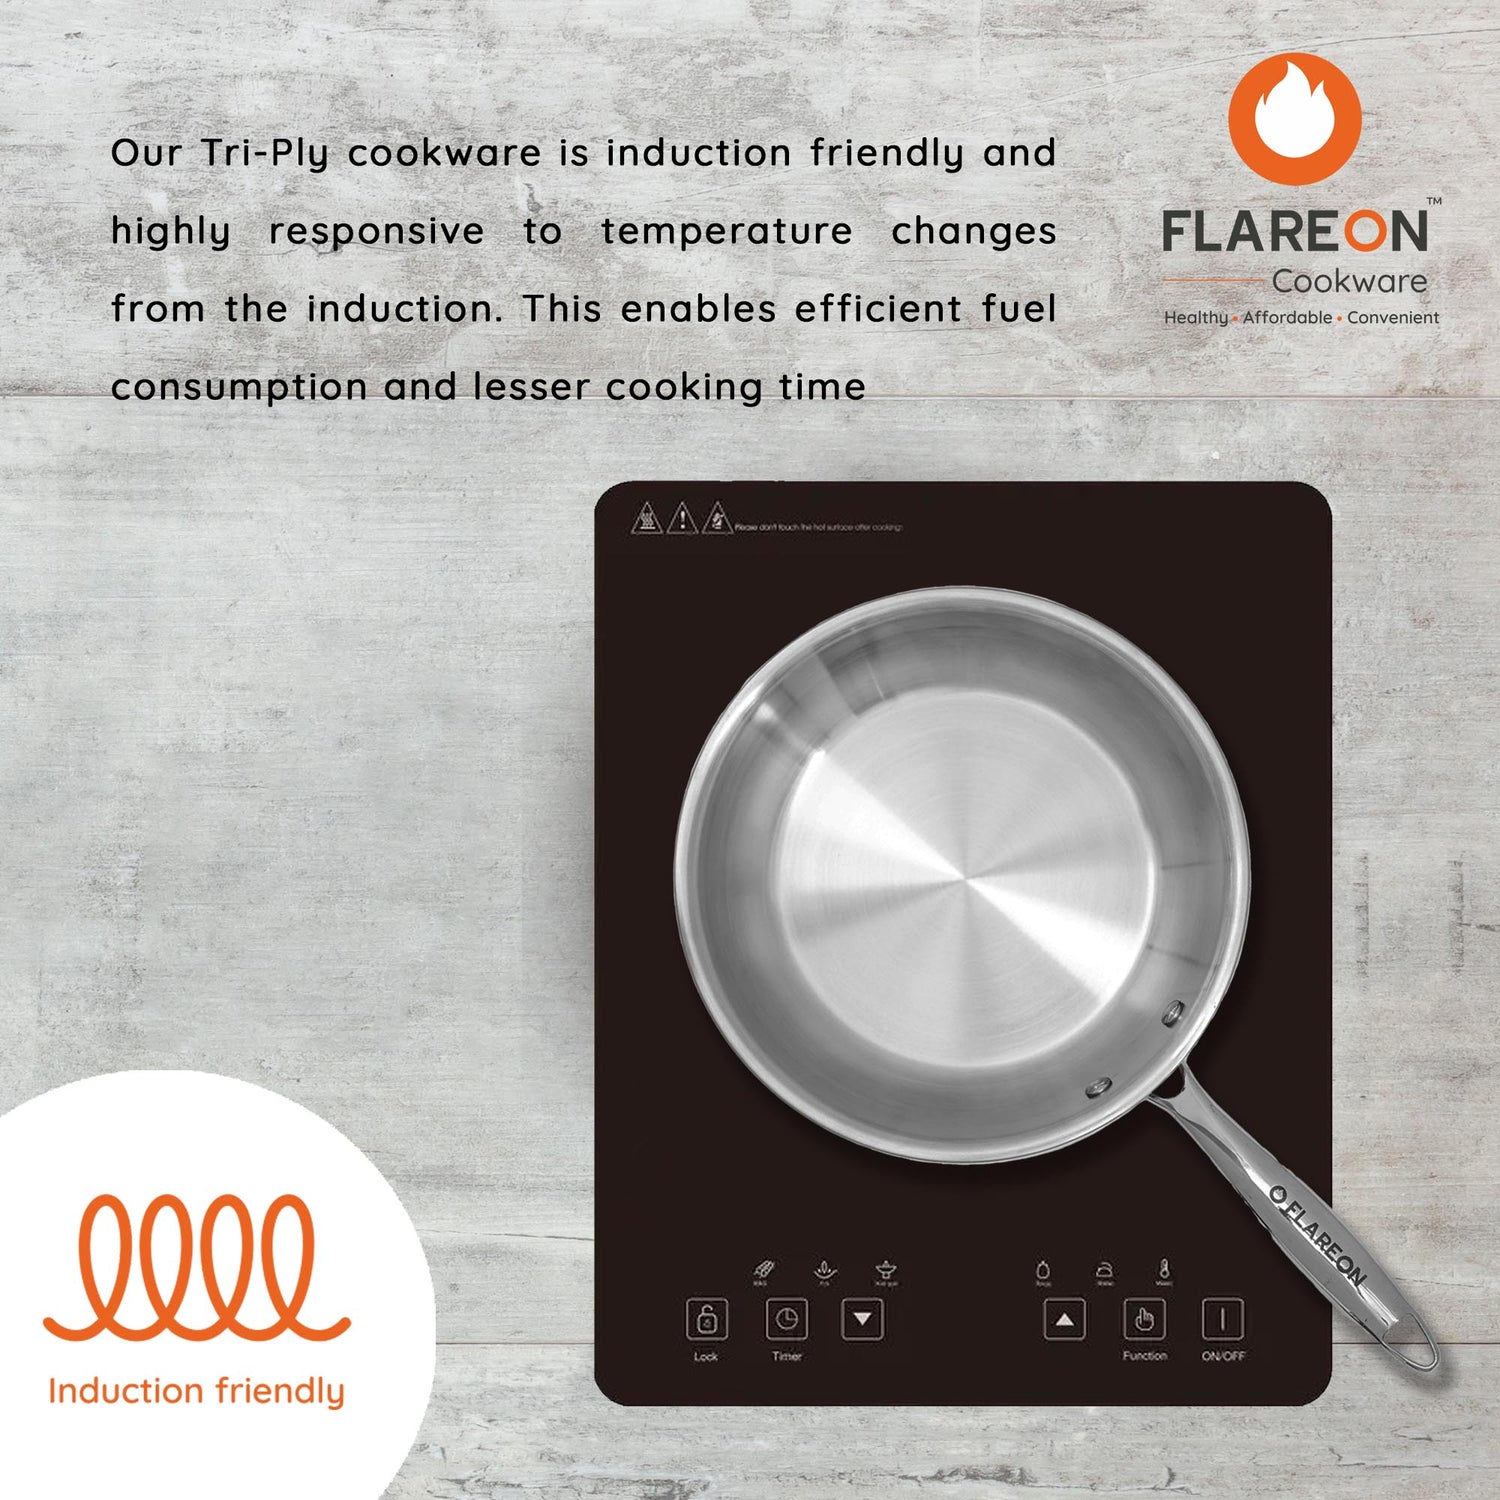 FlareOn's TriPly Stainless Steel Fry Pan 22 Cm- Induction Friendly